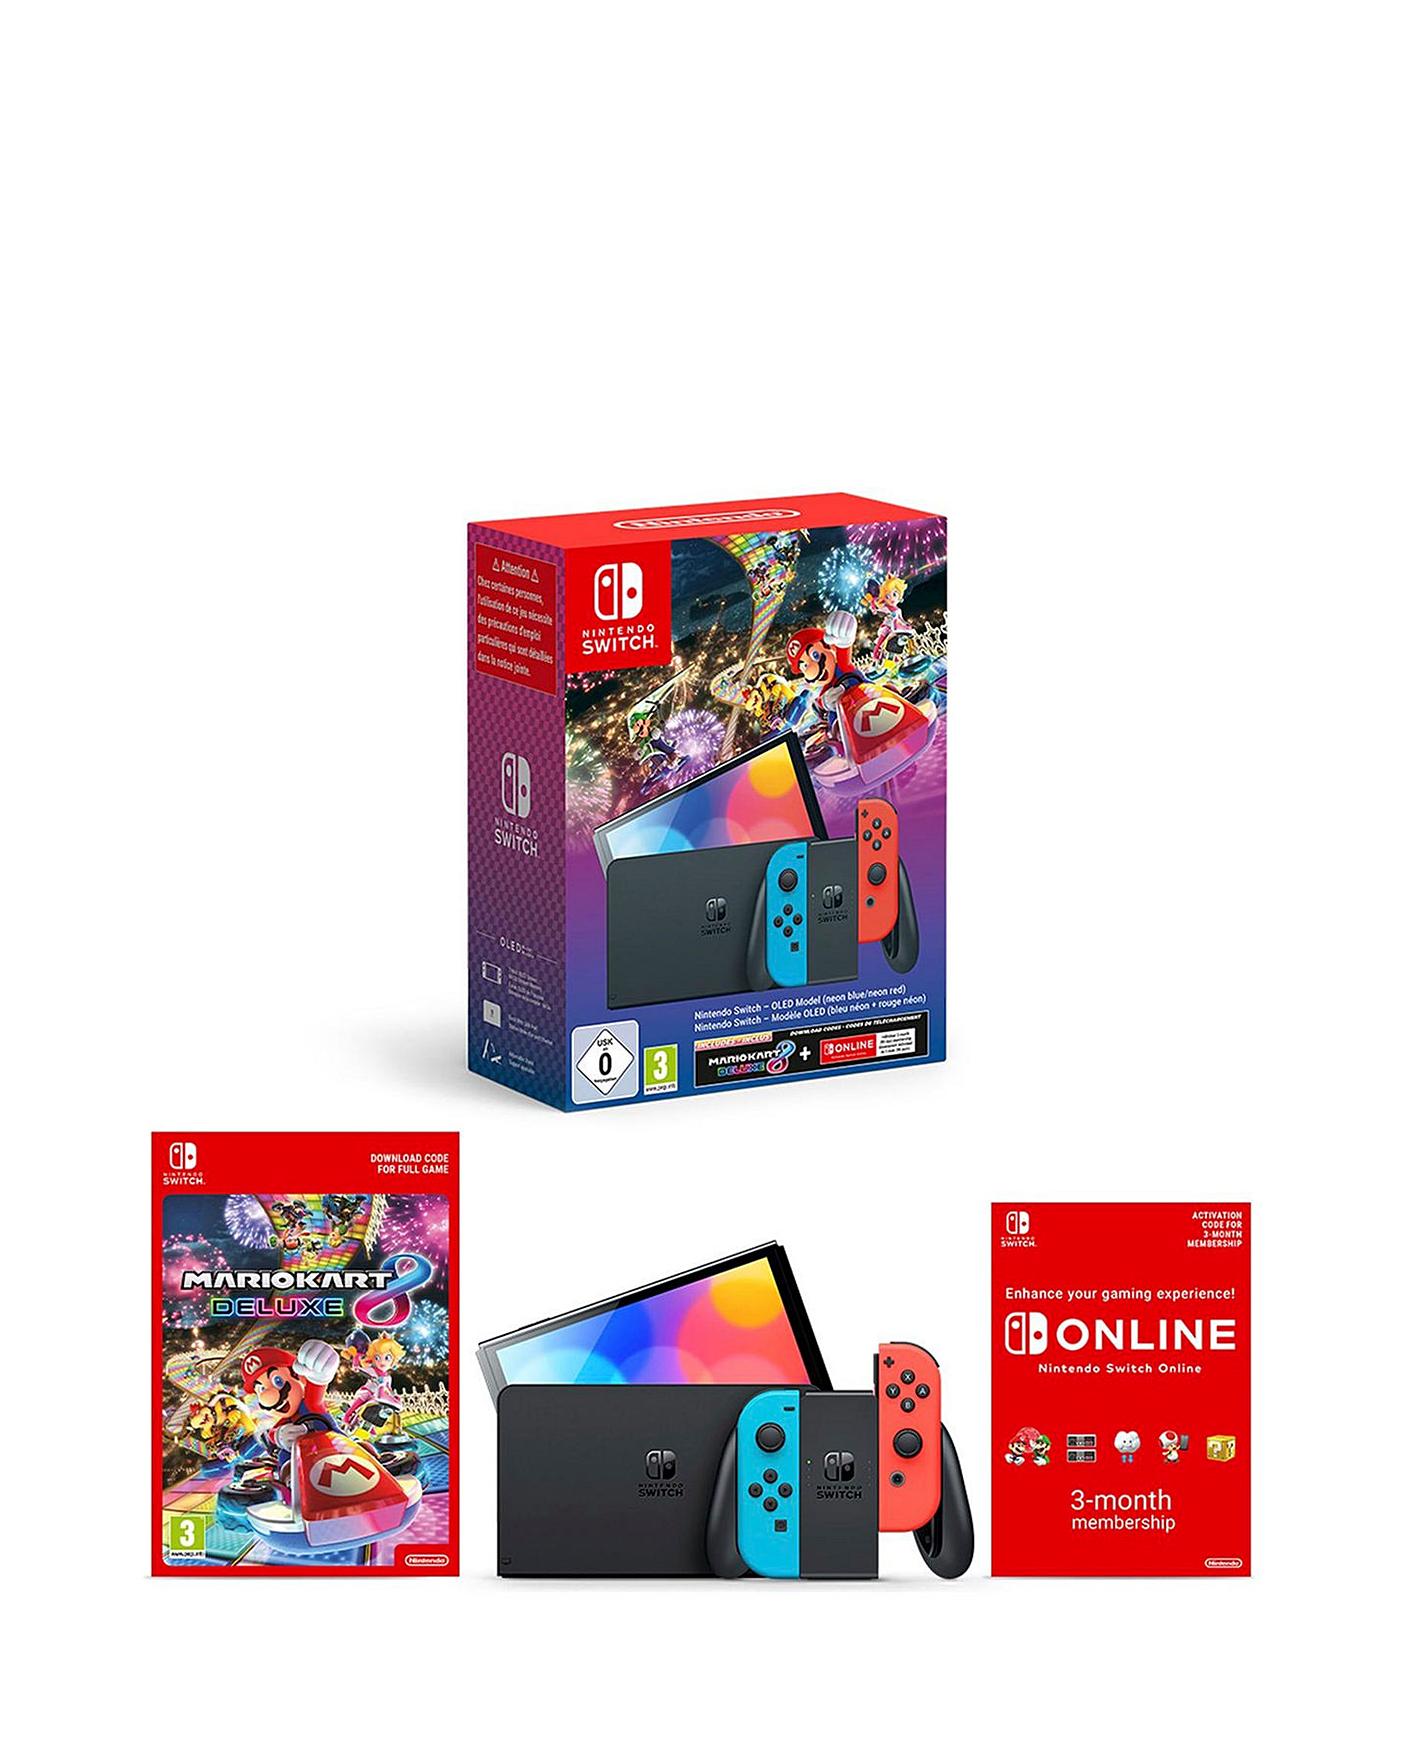 New Nintendo Switch OLED Console + Free Games + Neon Joy Con Controllers